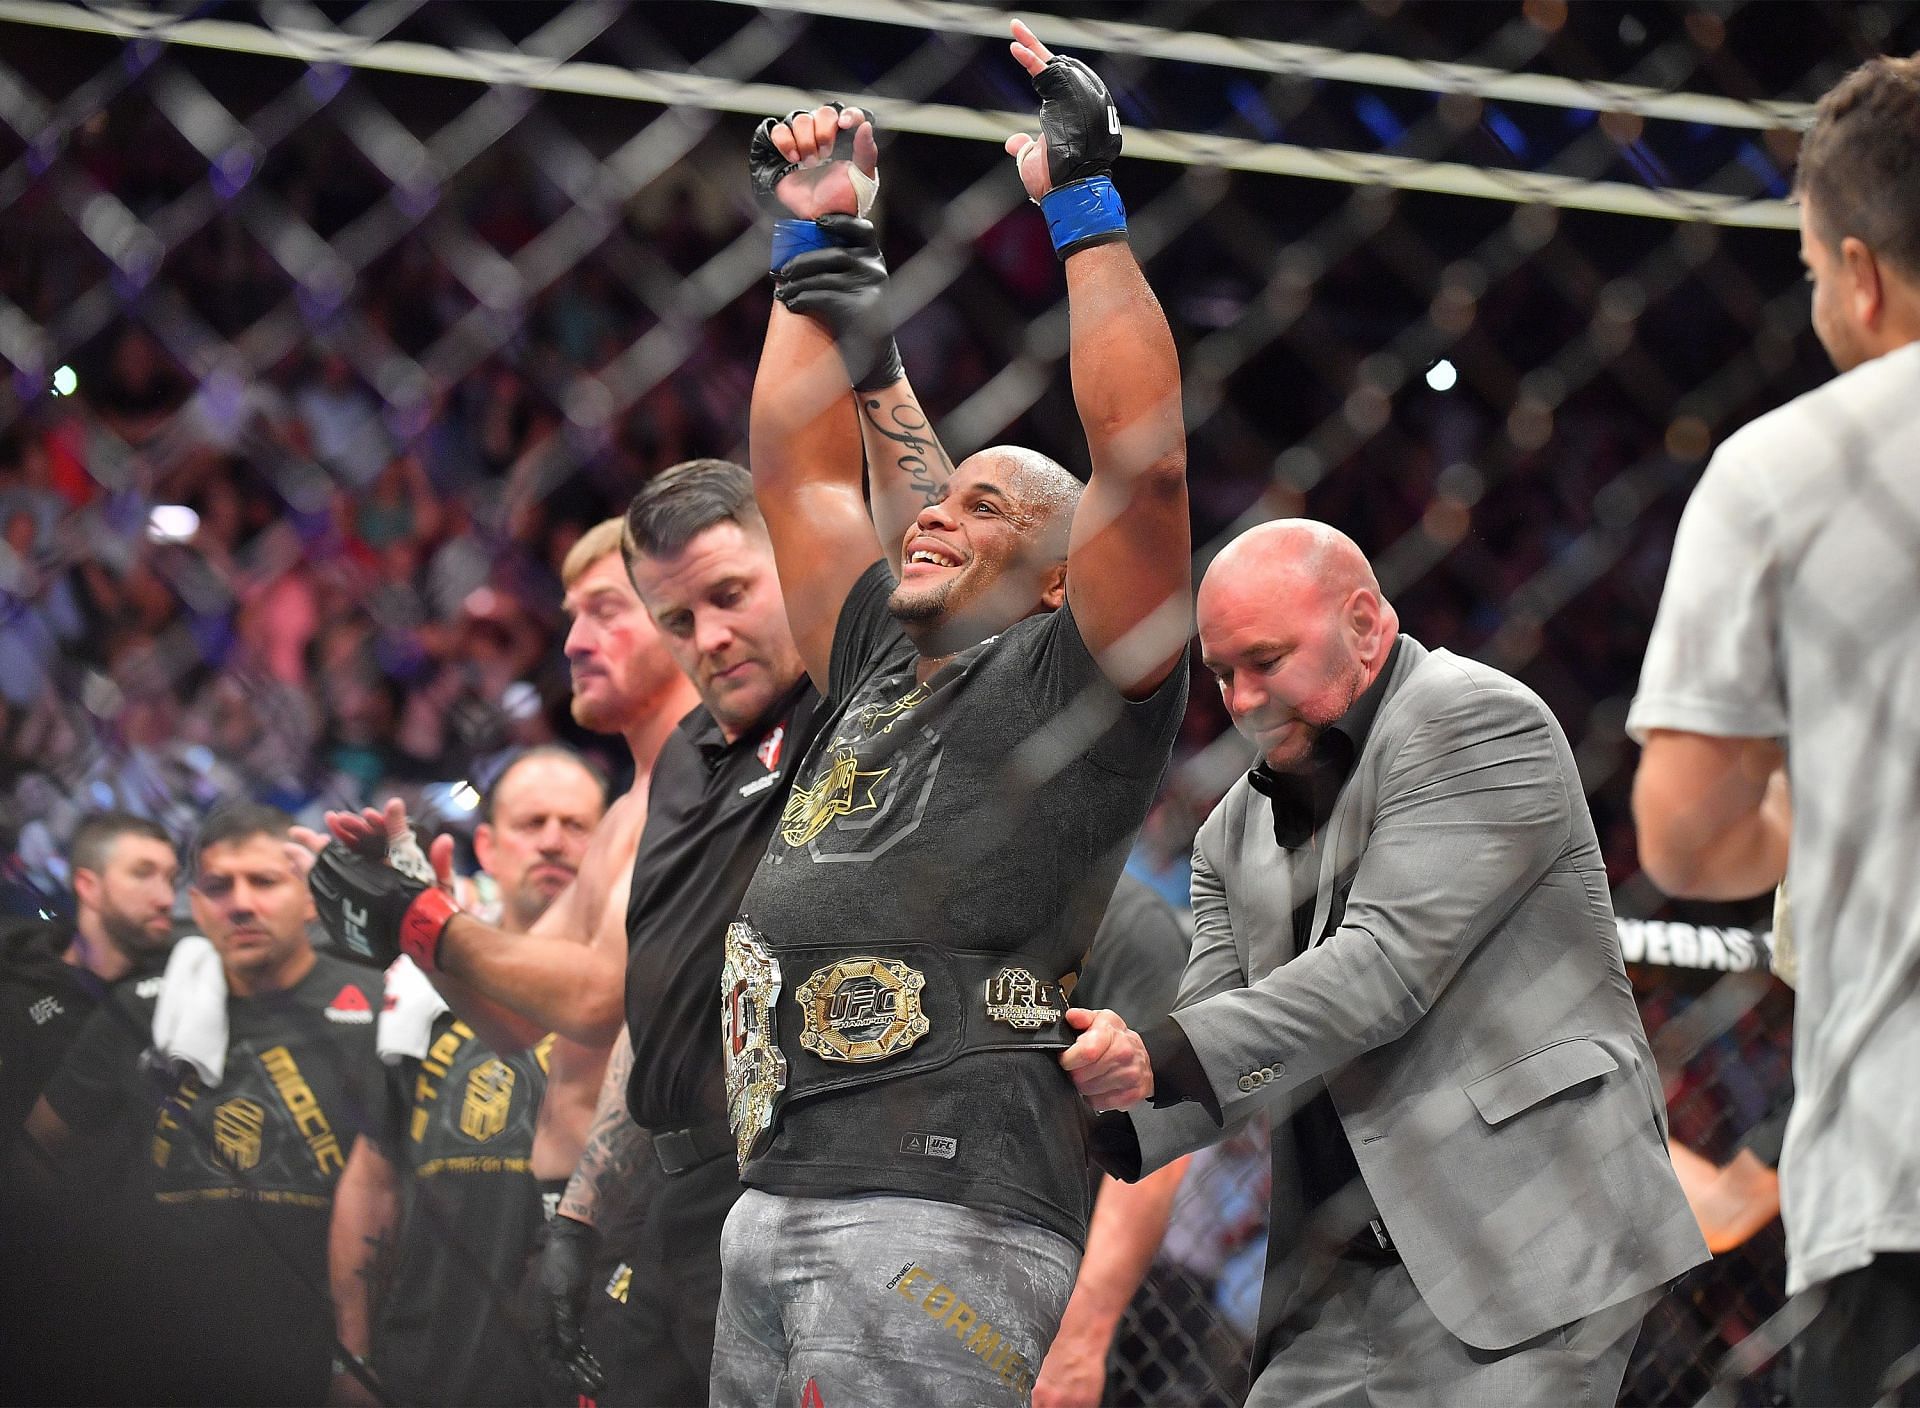 Daniel Cormier made history at UFC 226 in 2018